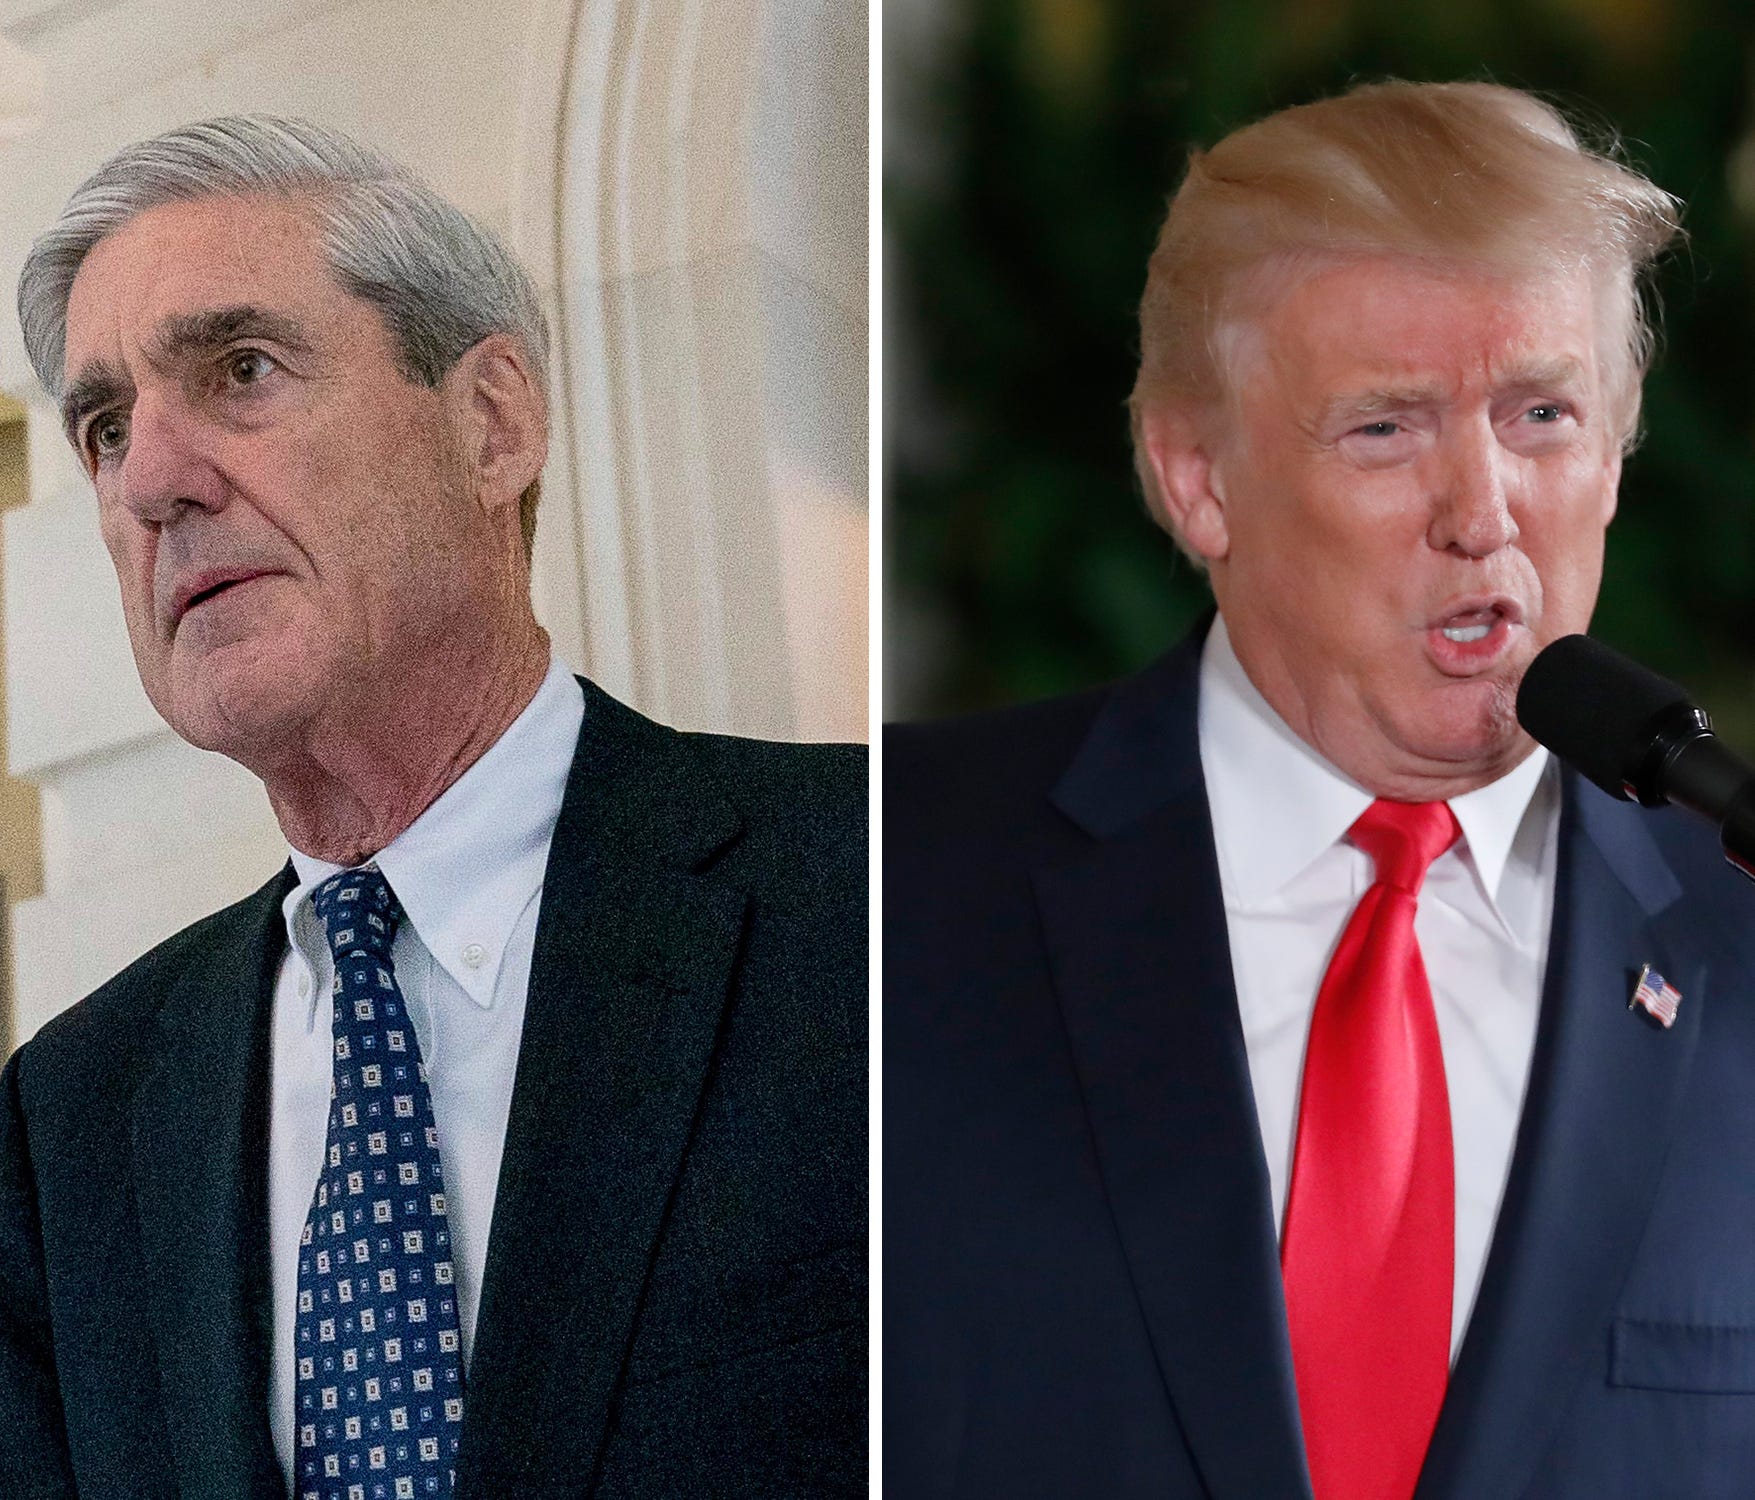 Special counsel Robert Mueller and President Trump